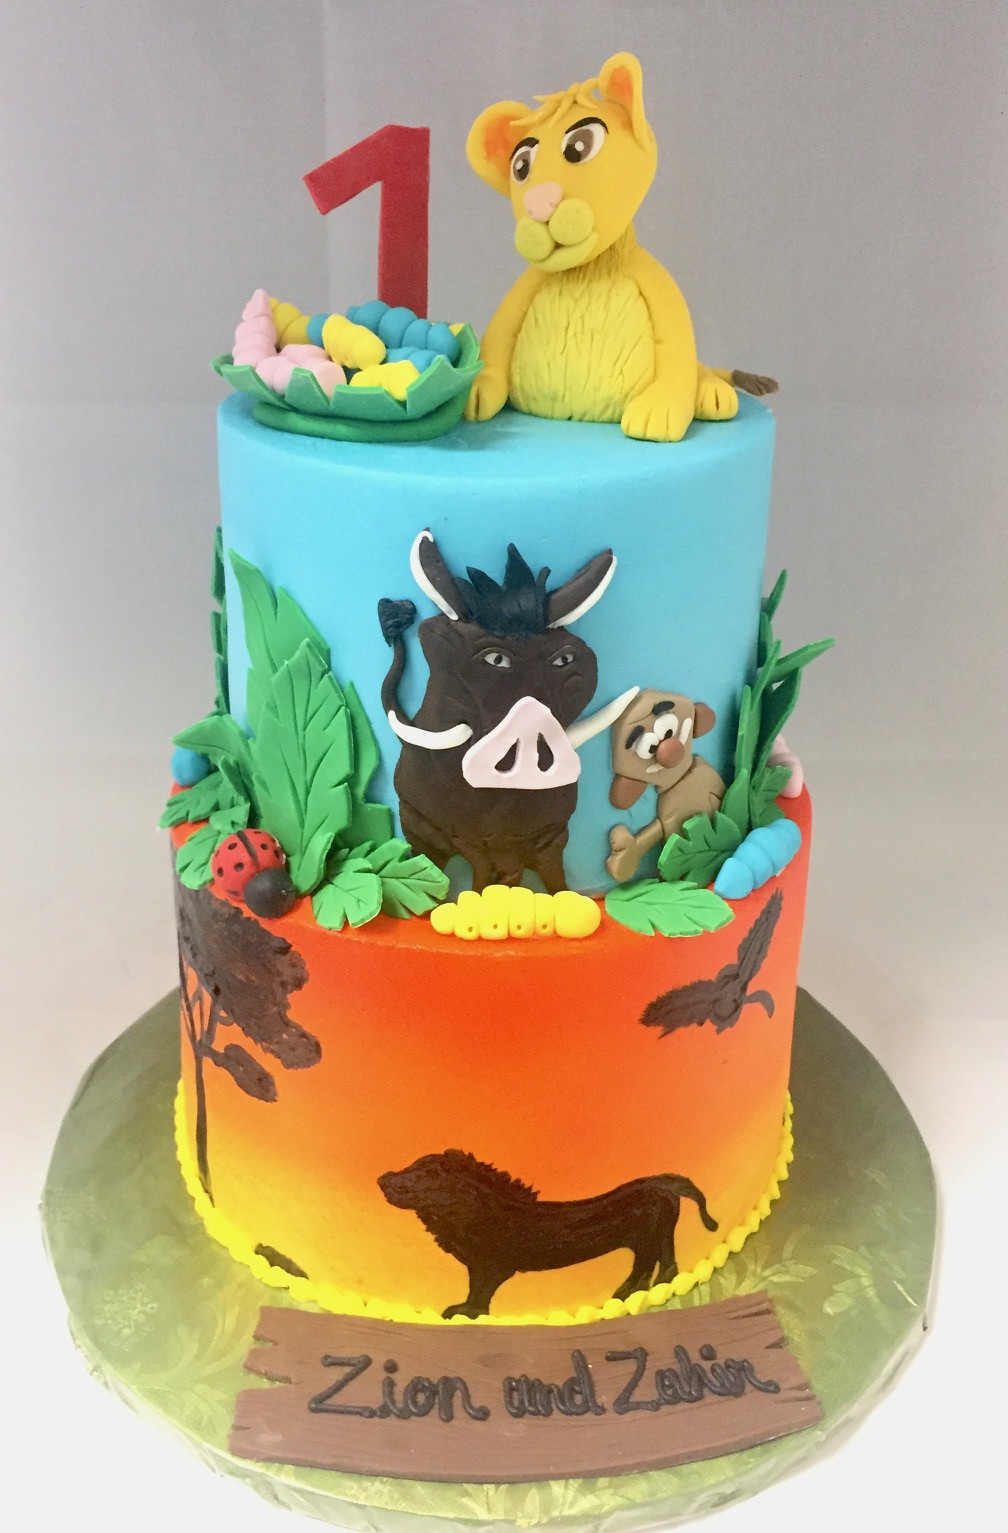 Lion King Birthday Cake
 2 Tier Lion King 1st Birthday Cake BC 125 Confection